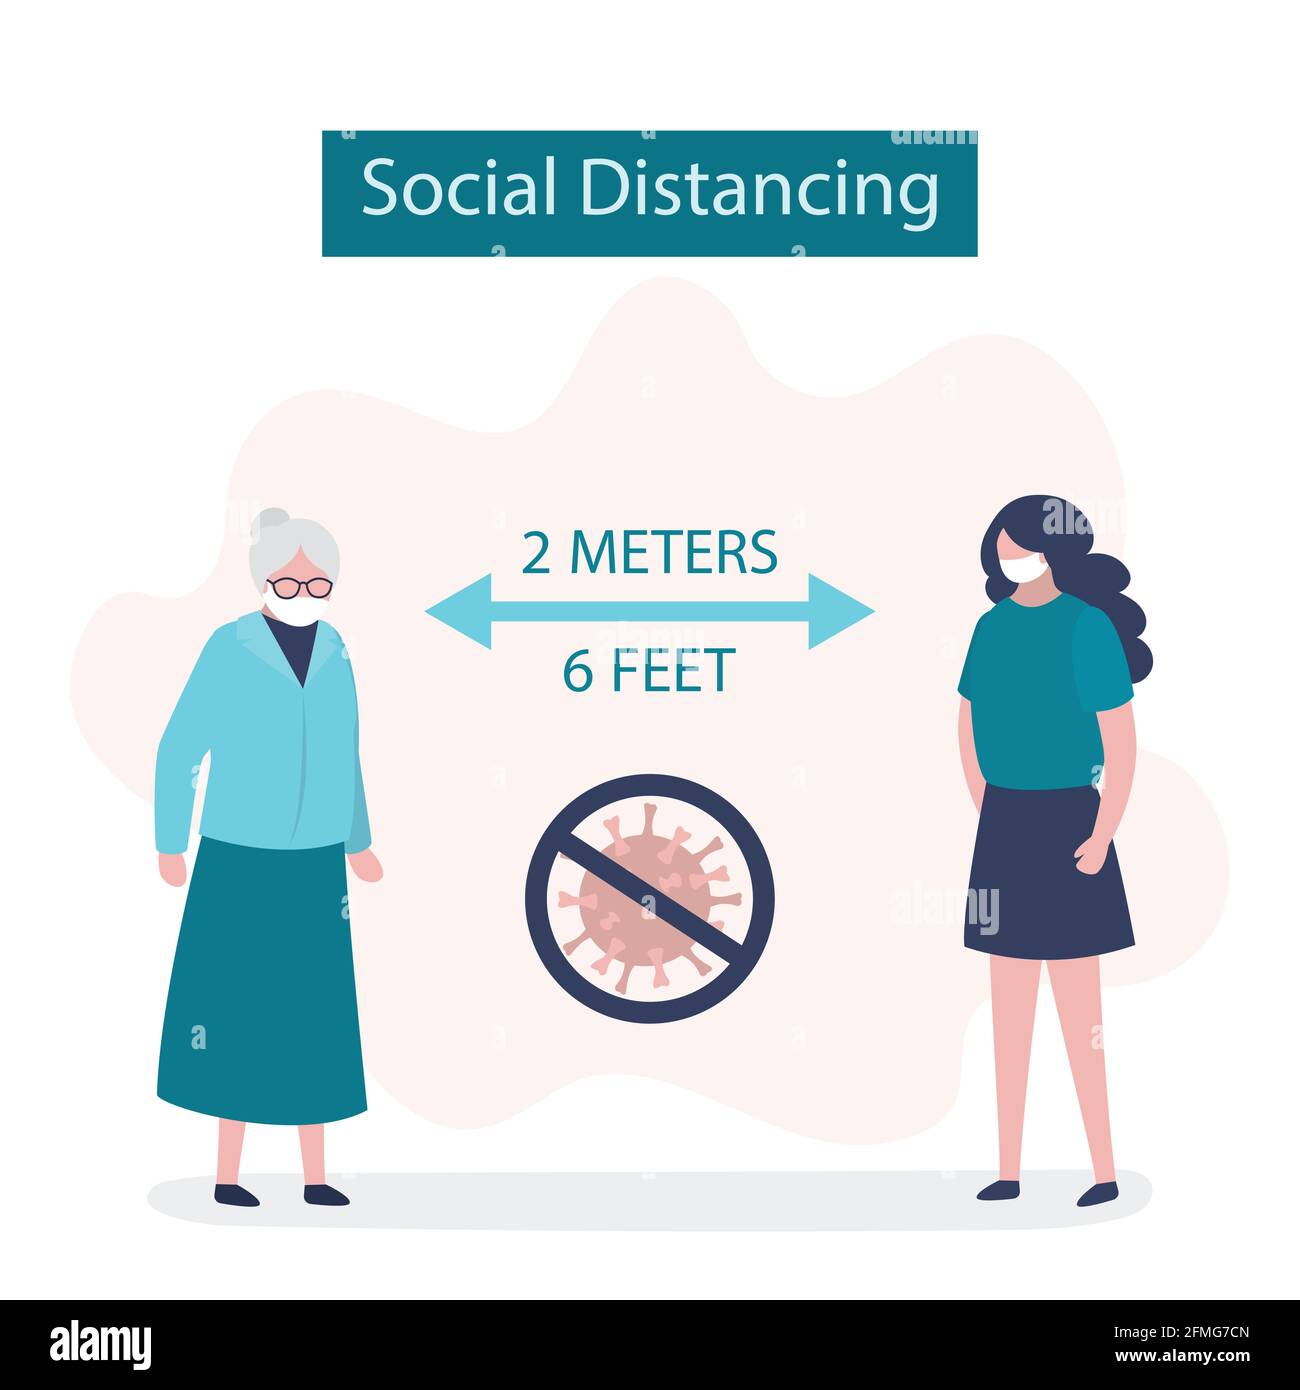 Social Distancing, two people keeping distance for infection risk and disease. 2 meters or 6 feet distance between humans. Covid-19 prevention banner. Stock Vector